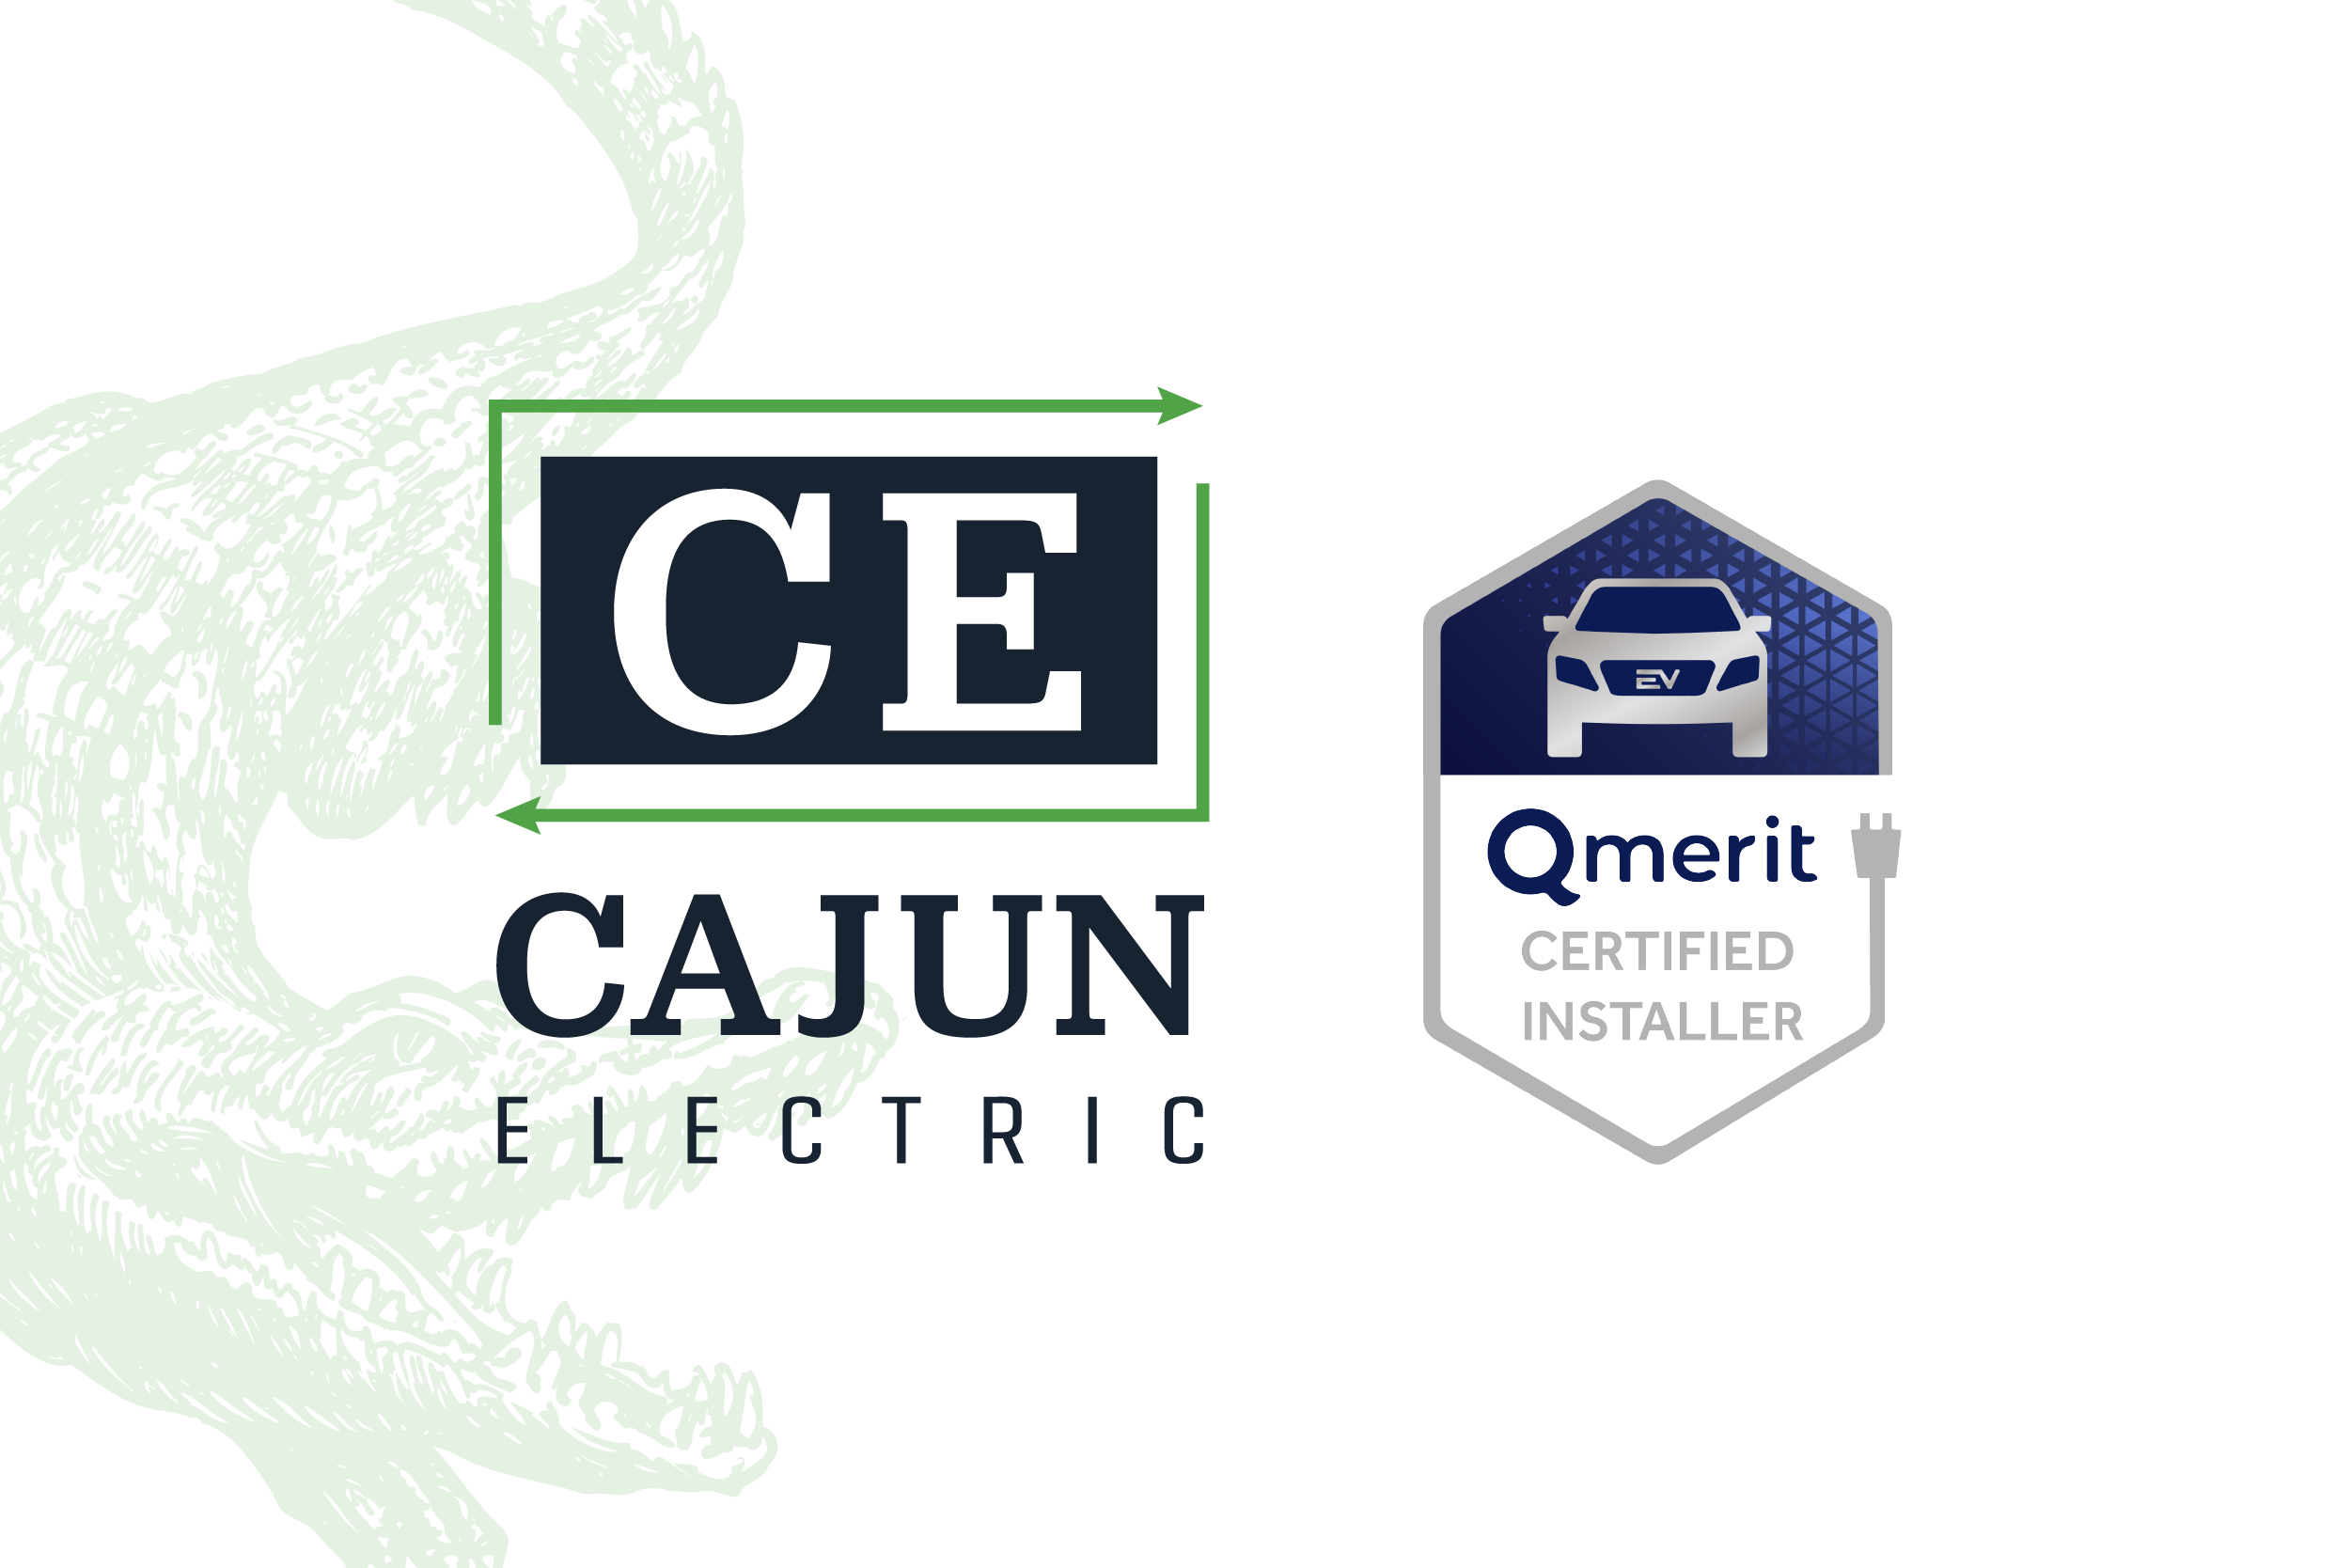 Work With a Qmerit Certified Installer When Going Electric